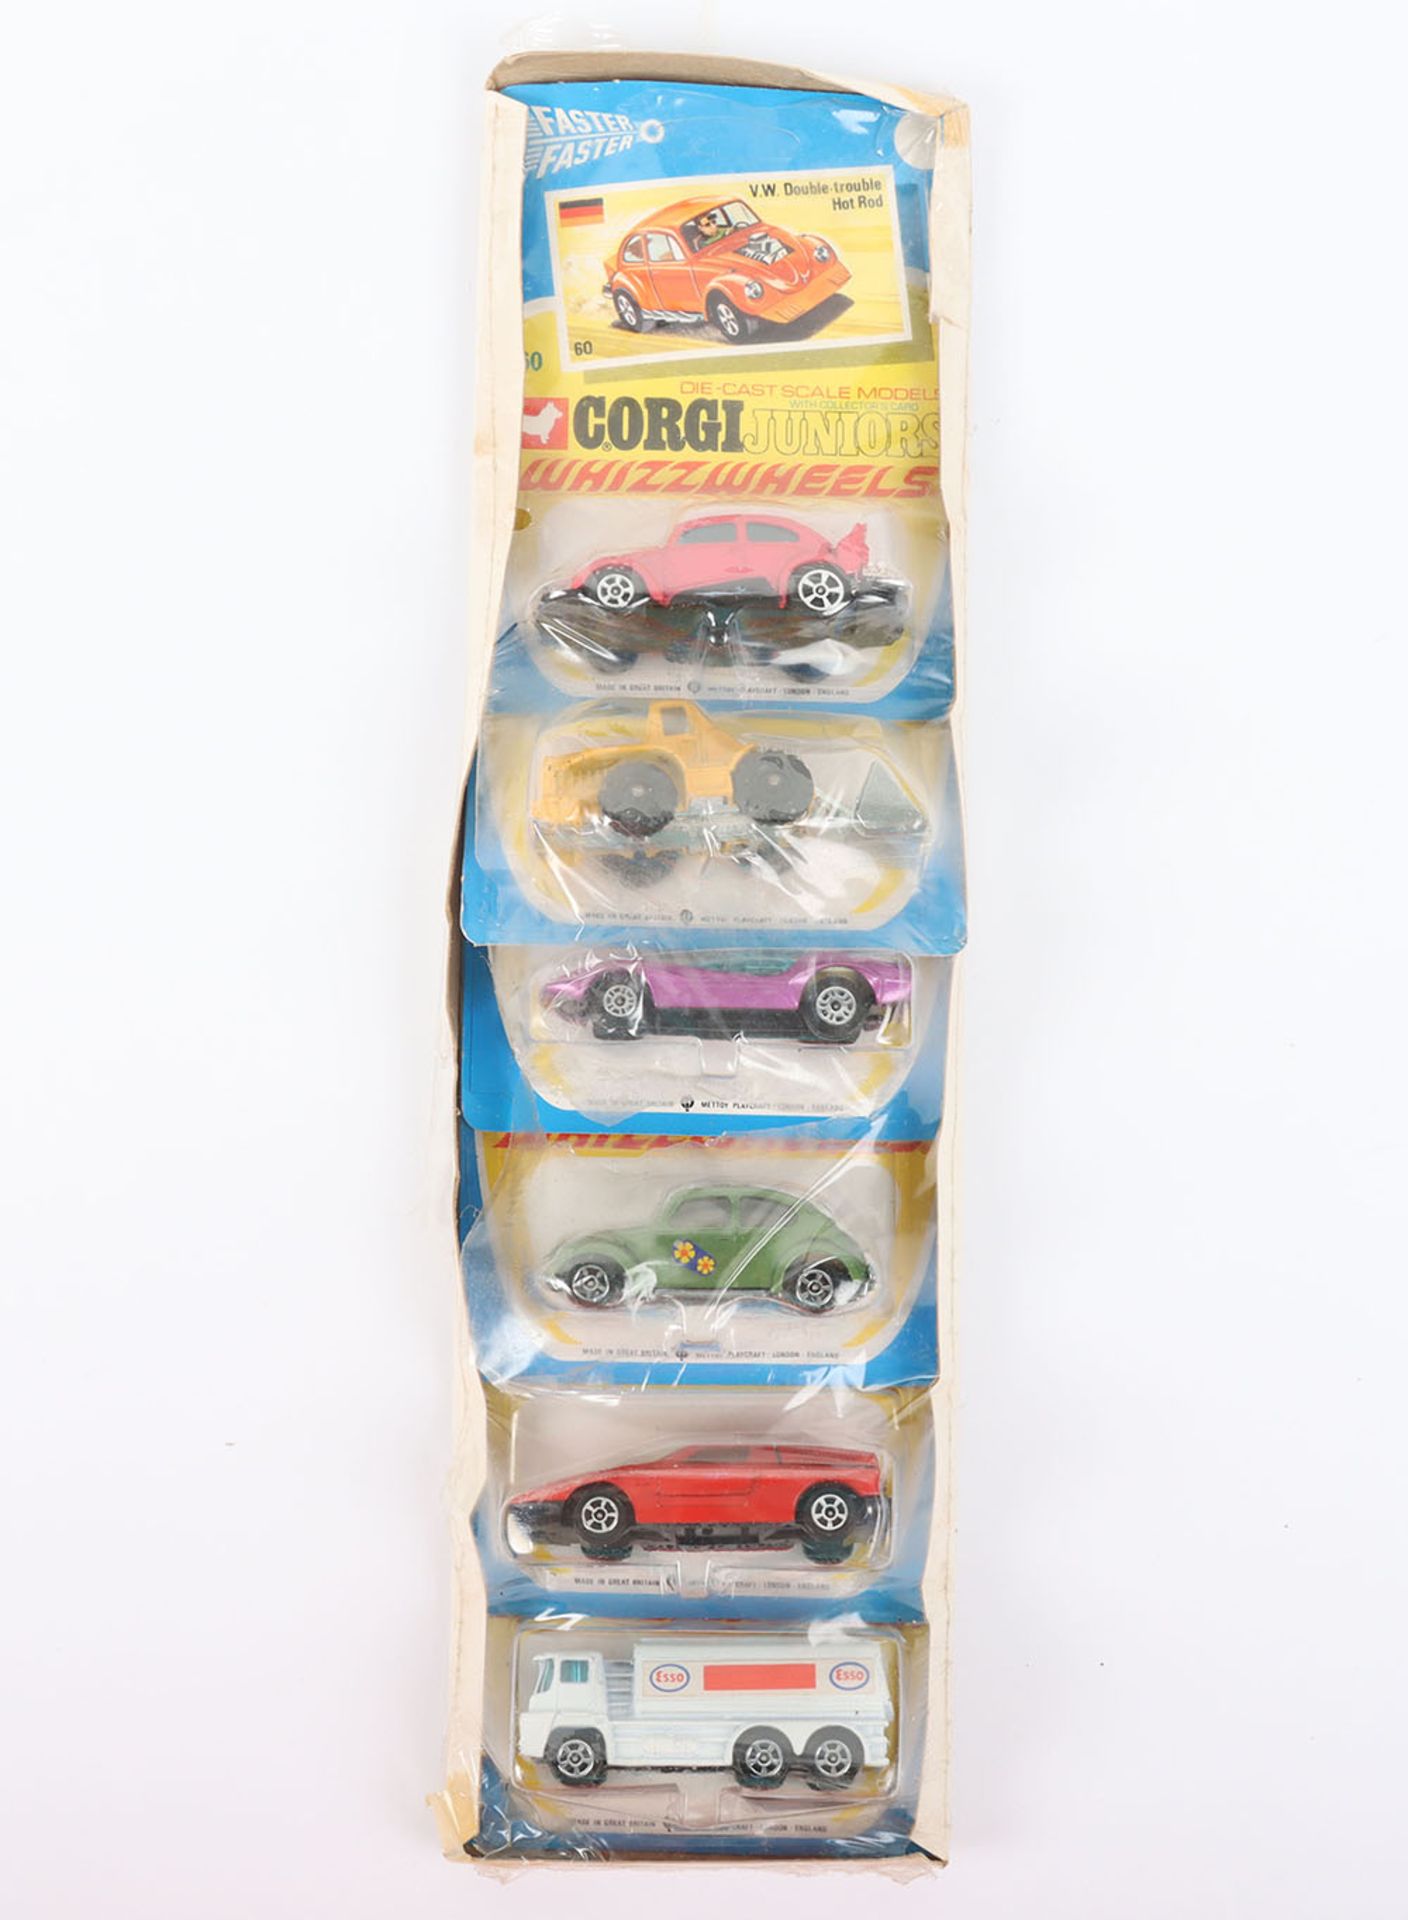 Six Carded Corgi Junior Models with collectors cards Shrunk Wrapped